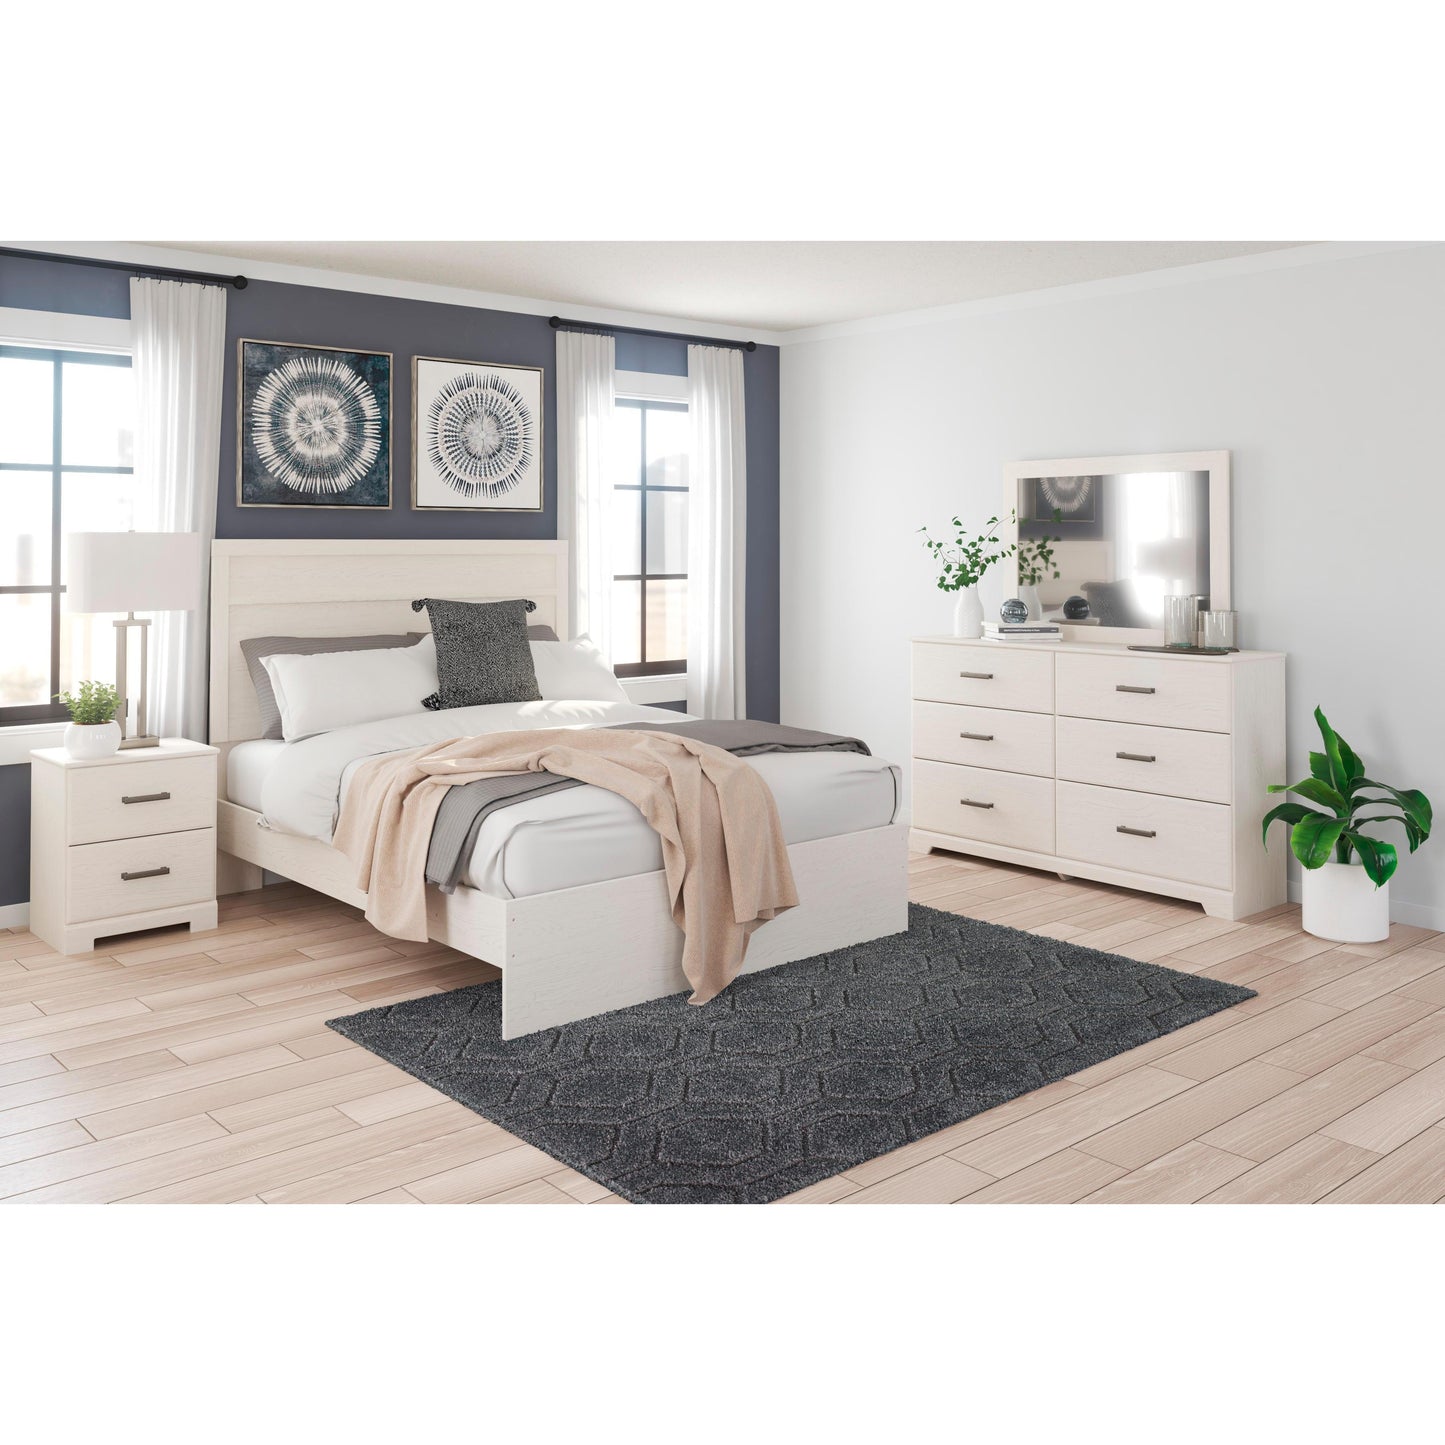 Signature Design by Ashley Stelsie B2588B7 6 pc Queen Panel Bedroom Set IMAGE 1